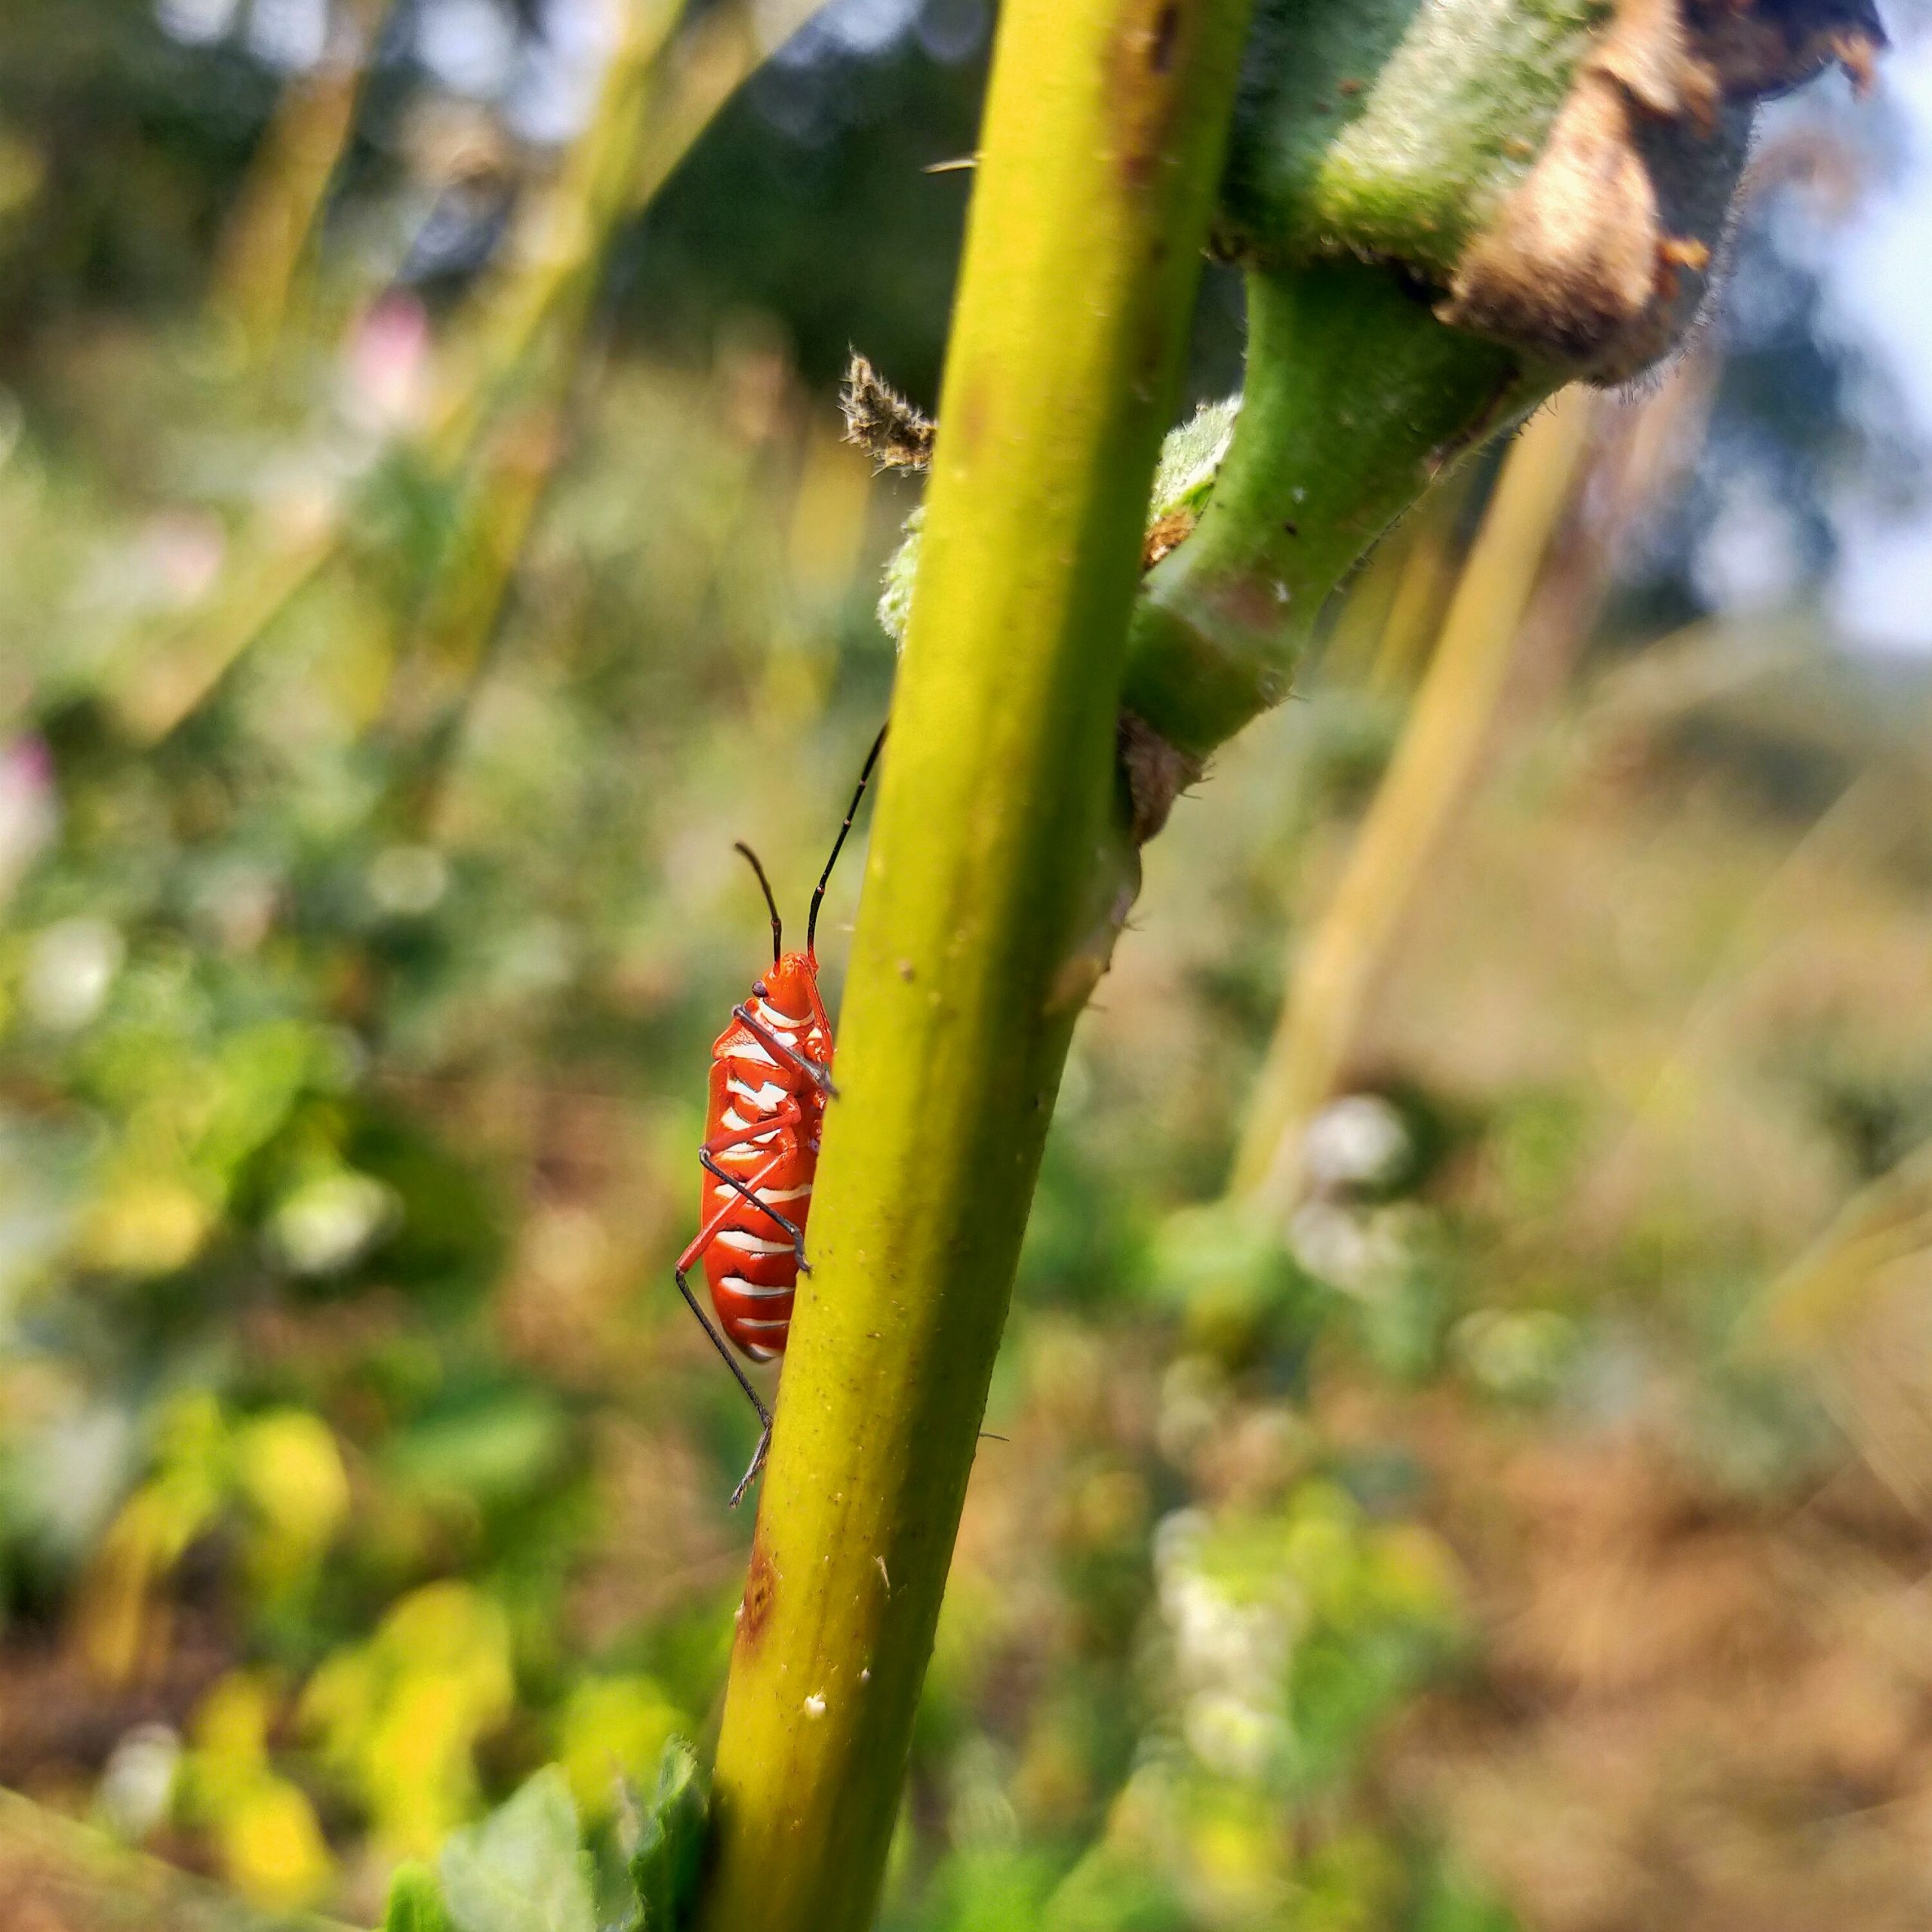 A insect on plant stem